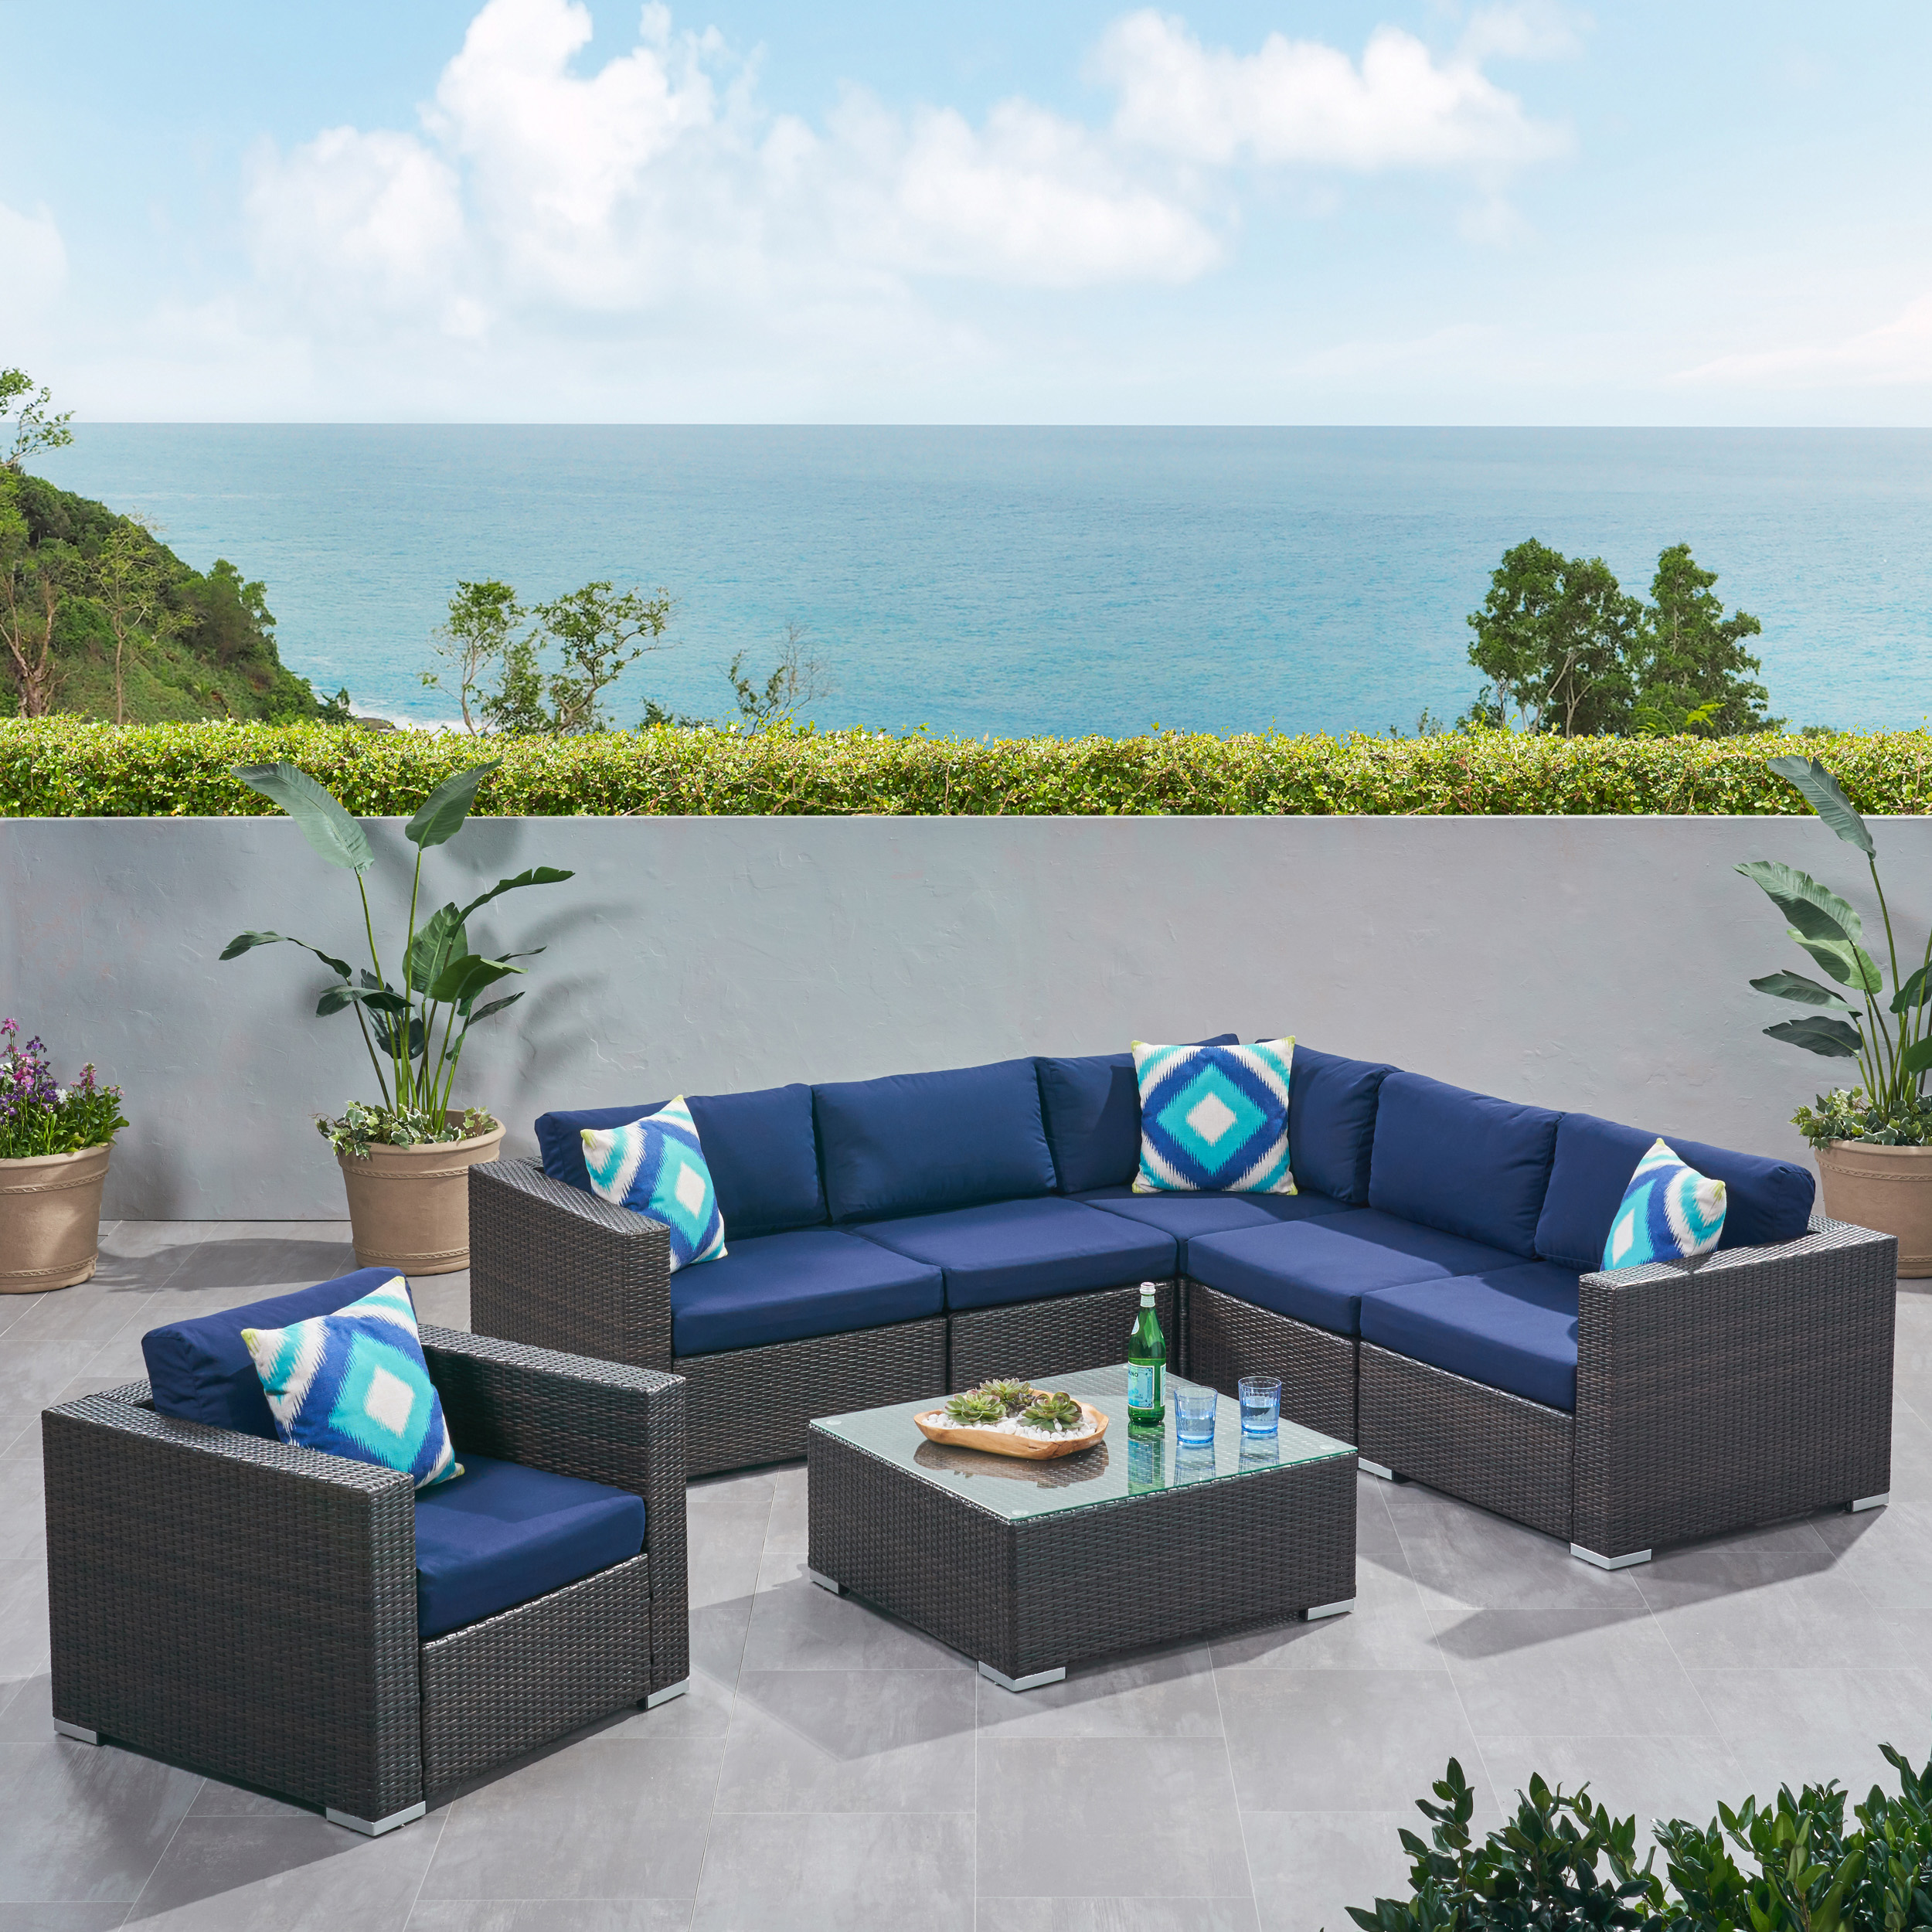 Faviola Outdoor 6 Seater Wicker Sectional Sofa Set with Sunbrella Cushions, Multibrown and Sunbrella Canvas Navy - image 1 of 10